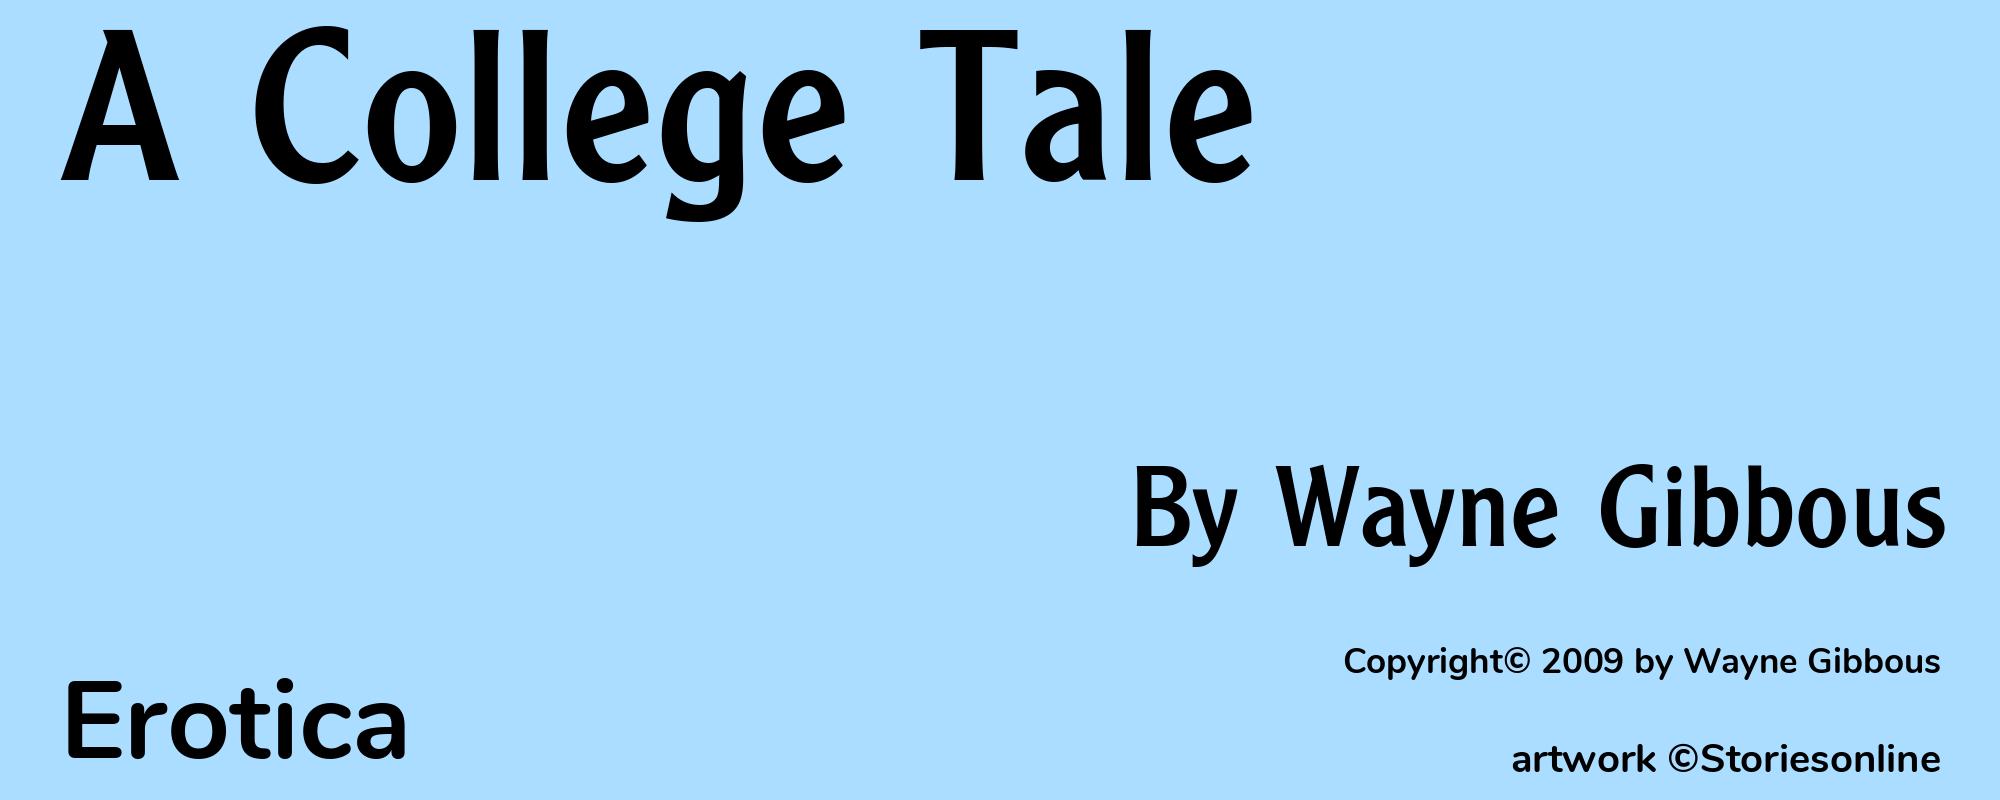 A College Tale - Cover